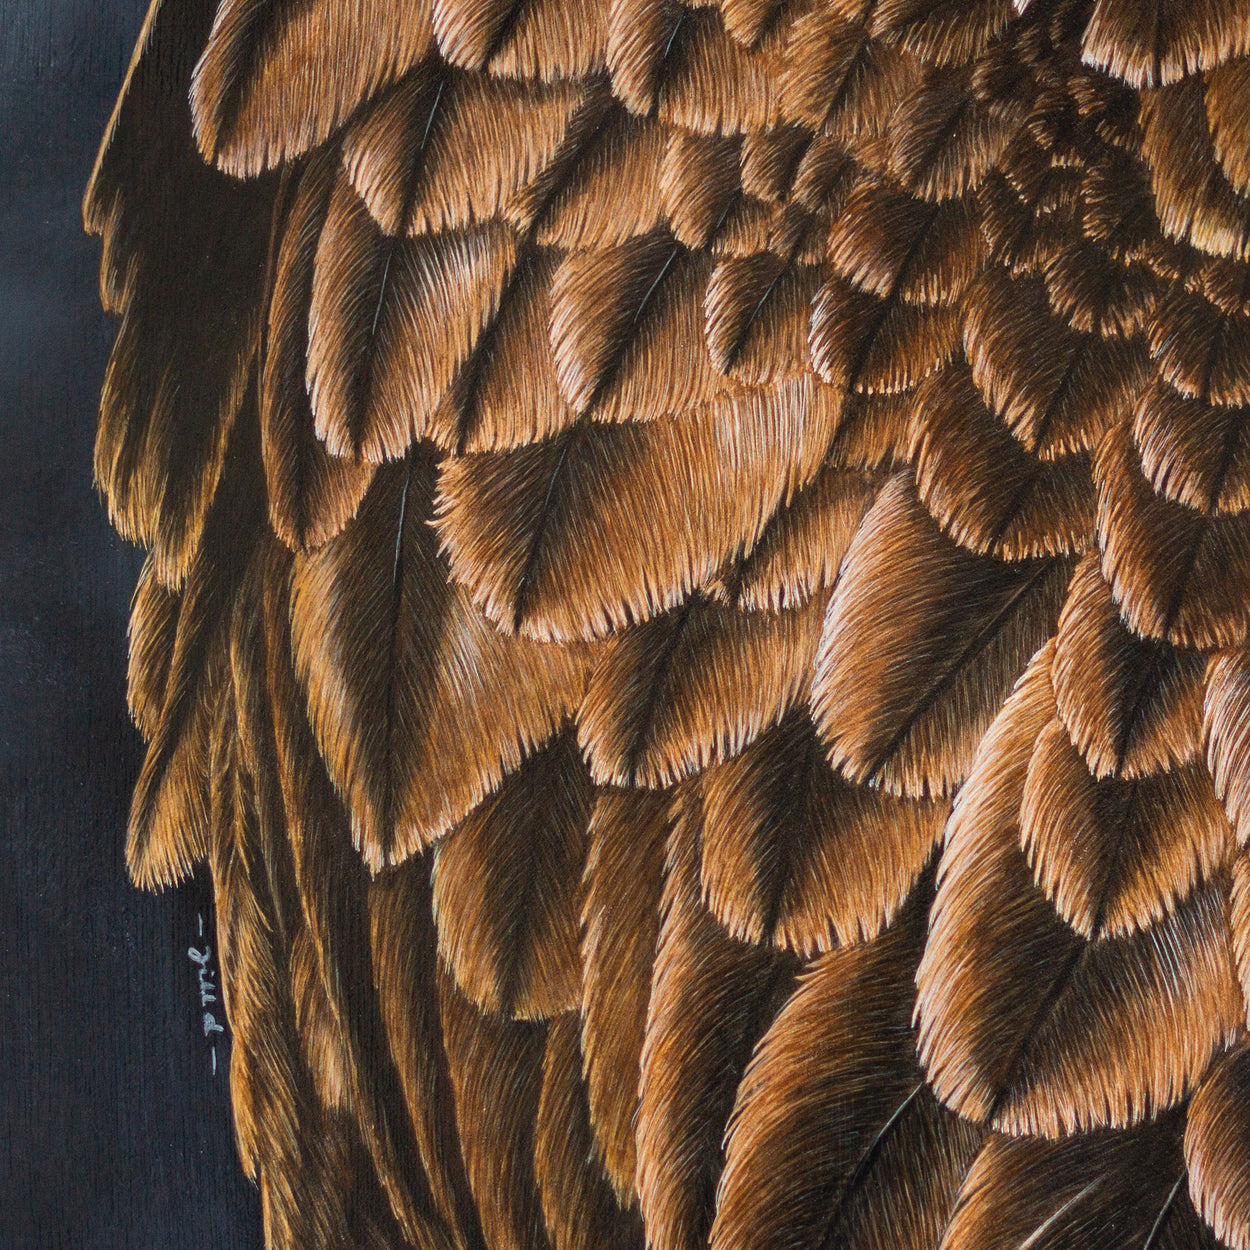 Red Kite Painting Close-up 4 - Jill Dimond